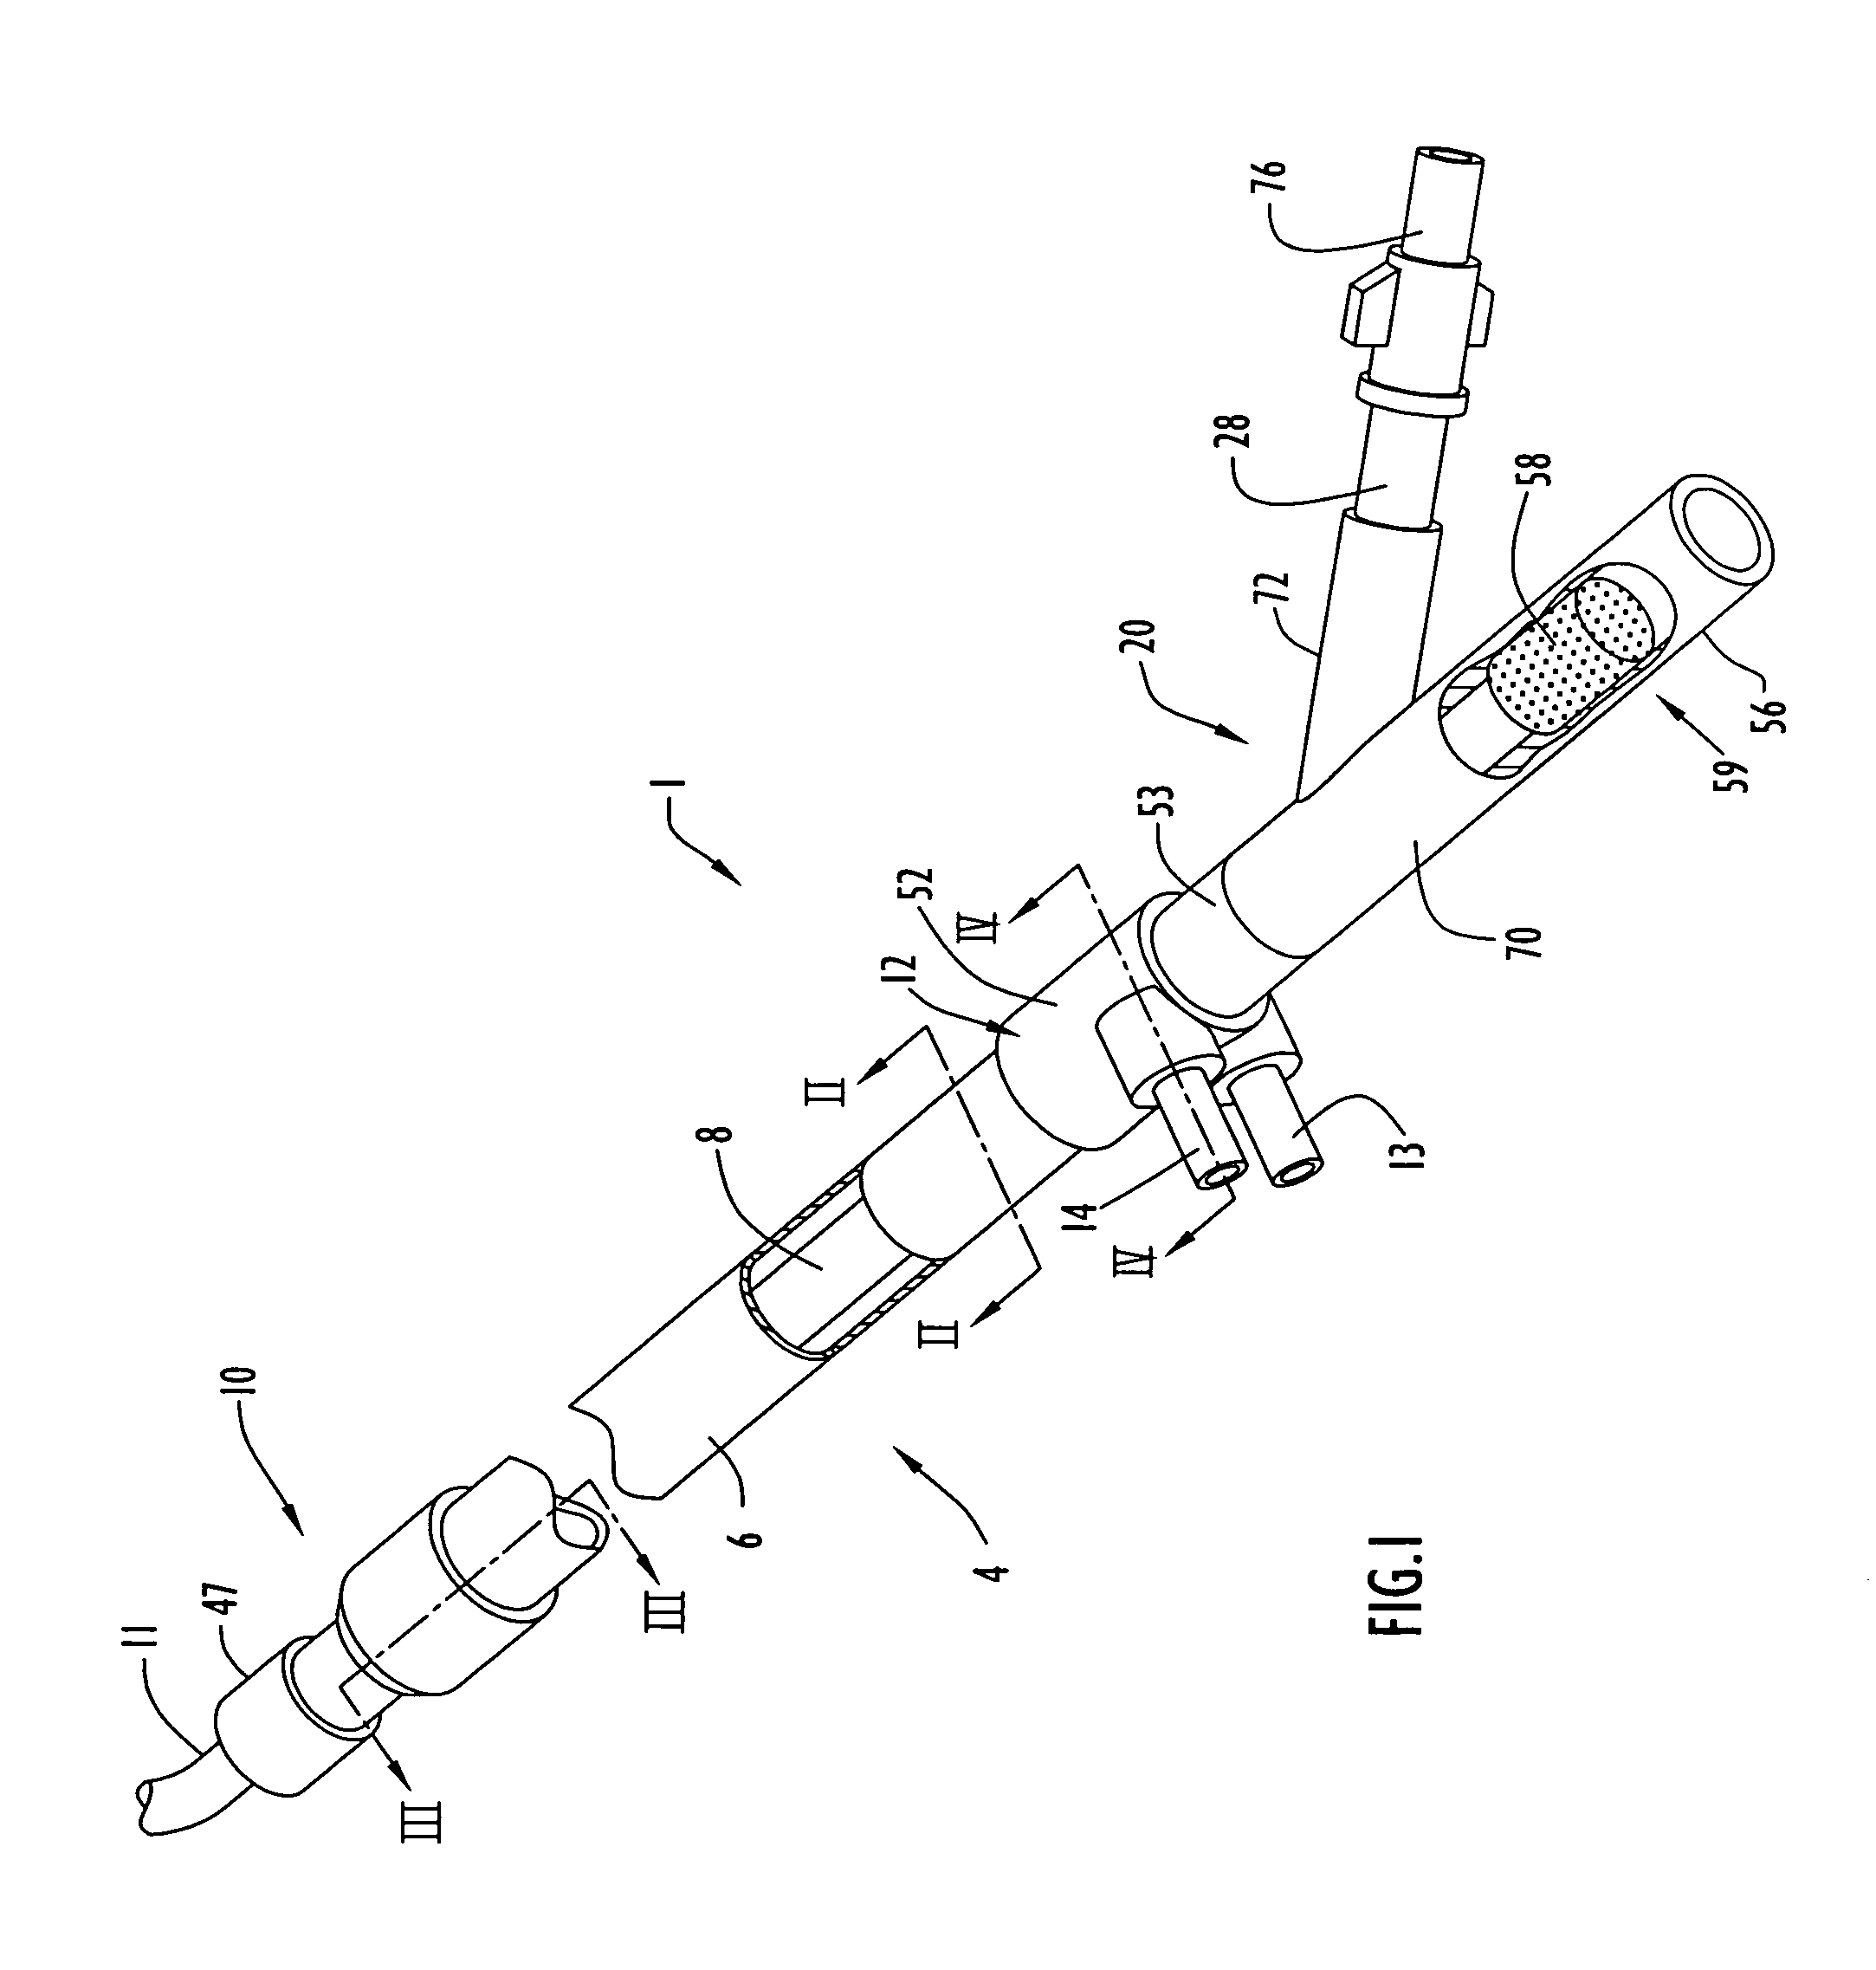 Method and apparatus for facilitating injection of medication into an intravenous fluid line while maintaining sterility of infused fluids